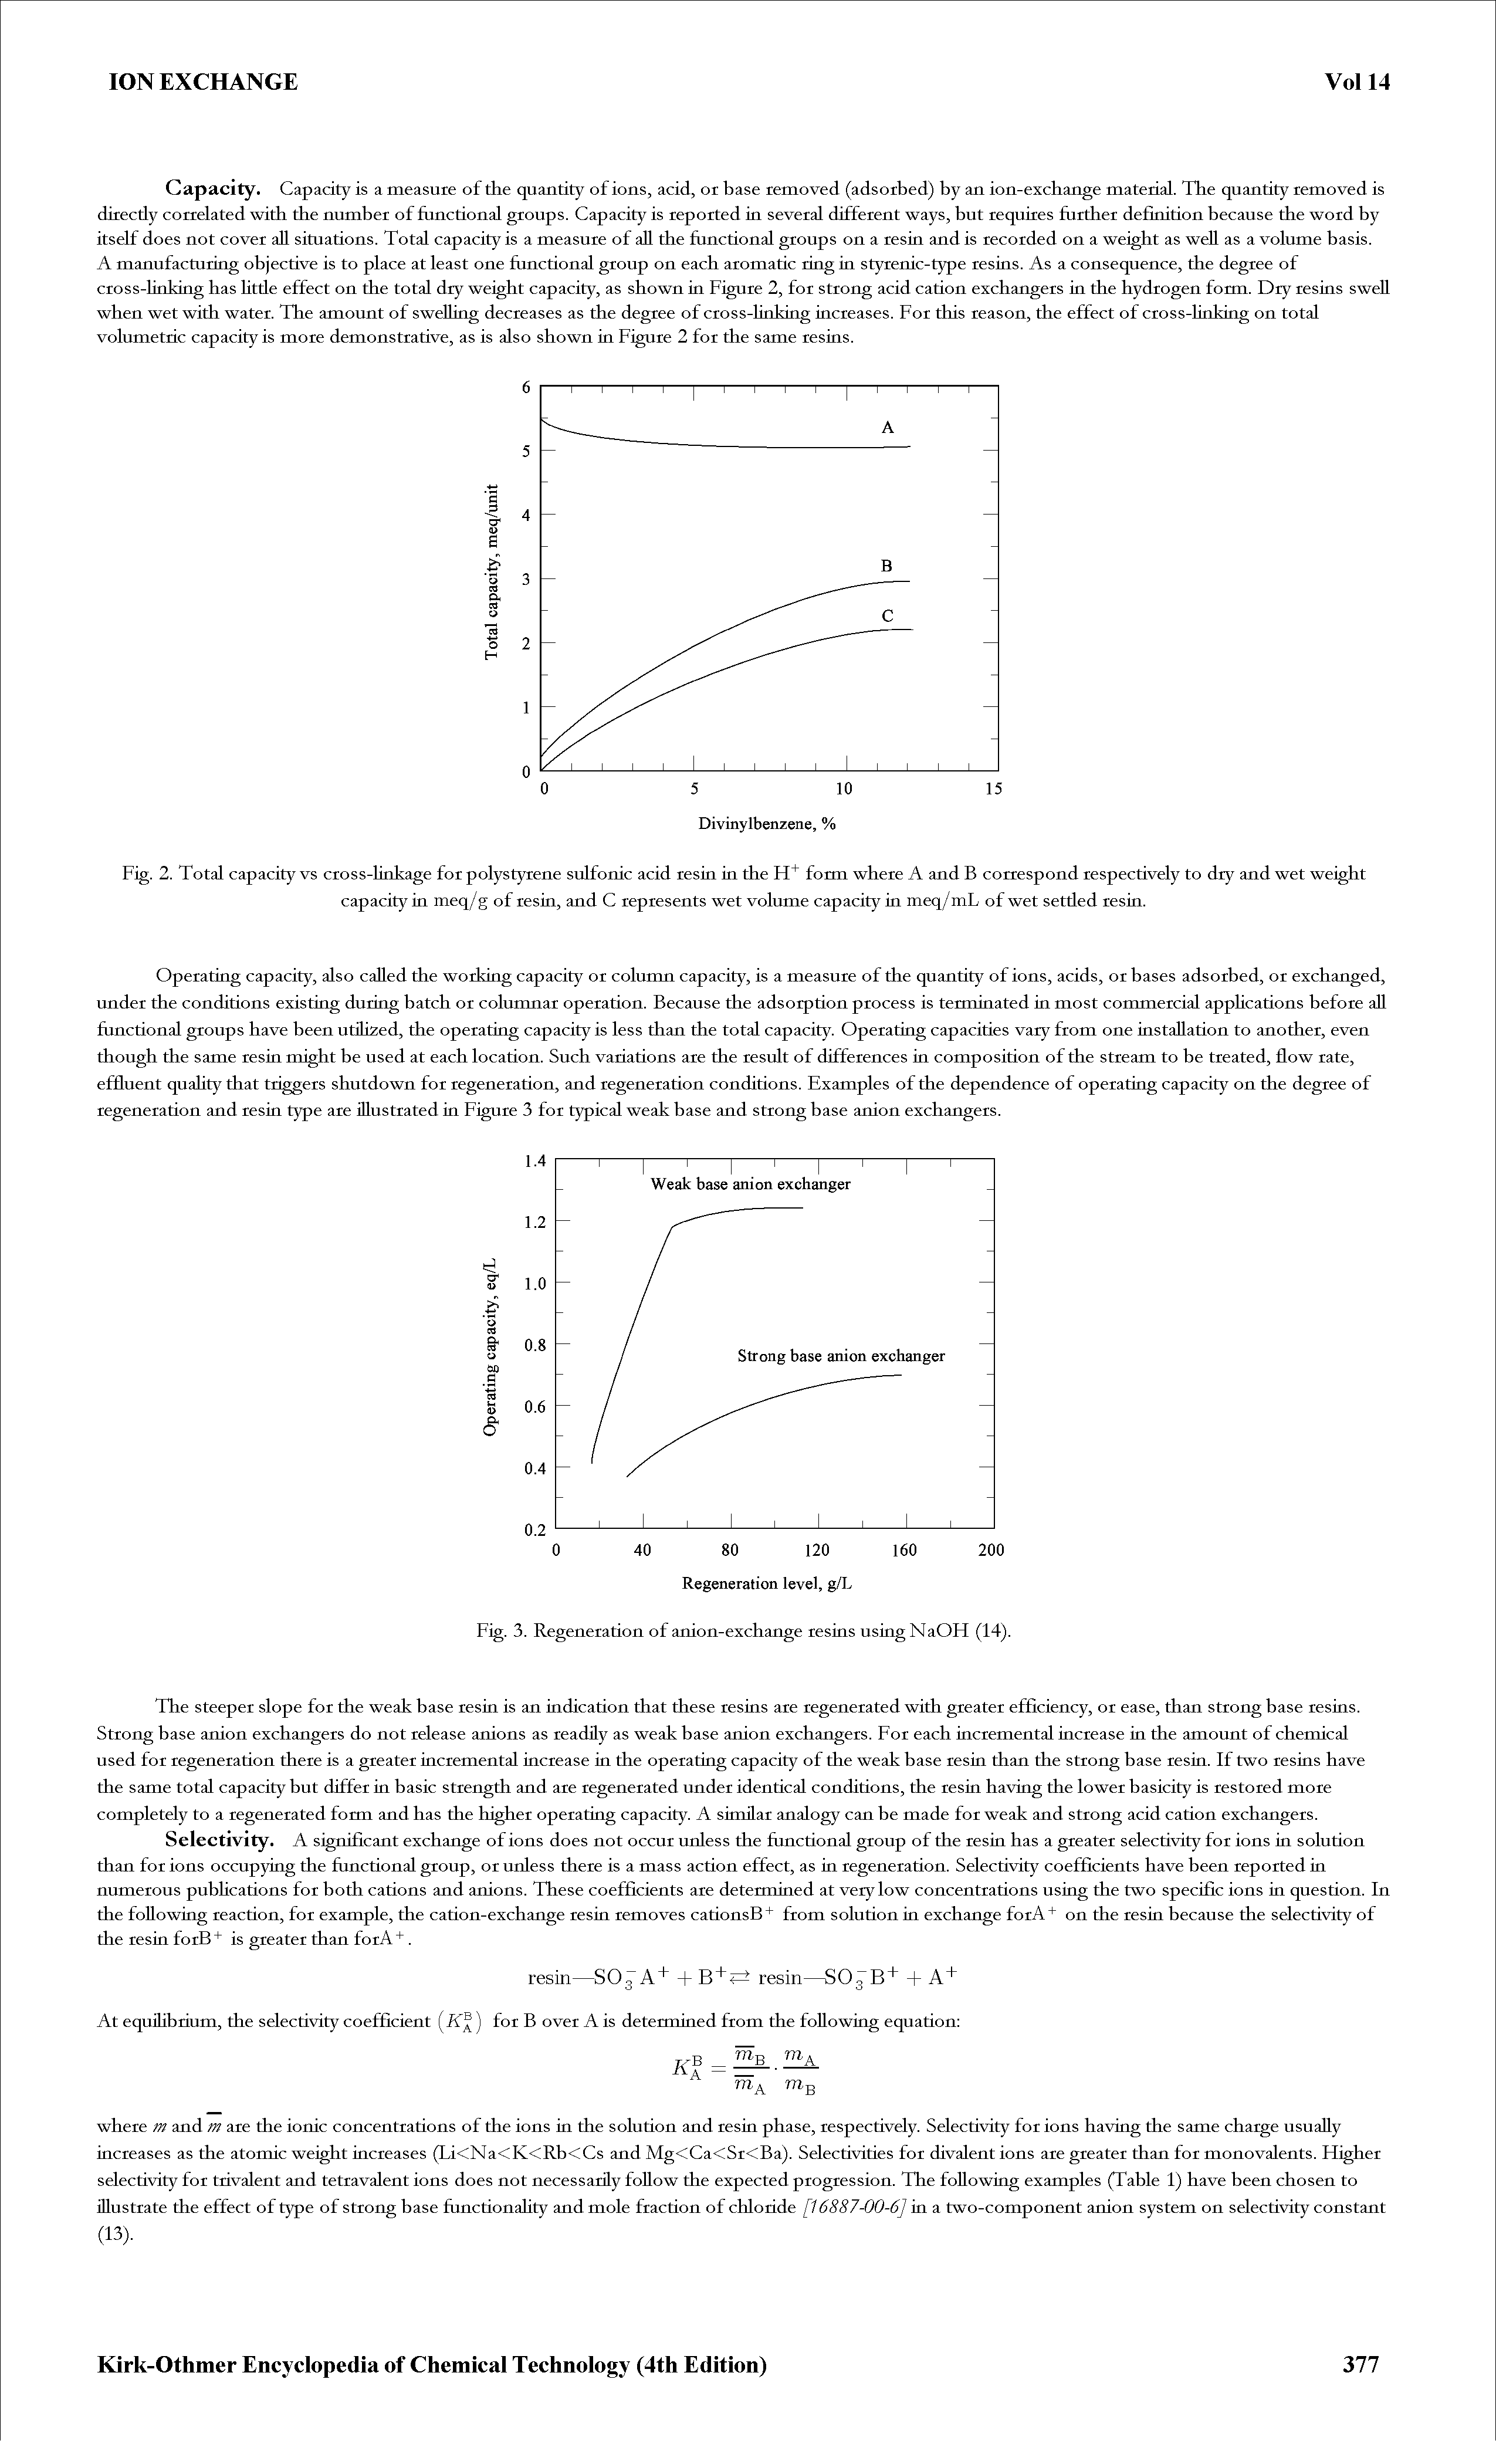 Fig. 2. Total capacity vs cross-linkage for polystyreae sulfonic acid resin in the form where A and B correspond respectively to dry and wet weight capacity in meq/g of resin, and C represents wet volume capacity in meq/mL of wet setded resin.